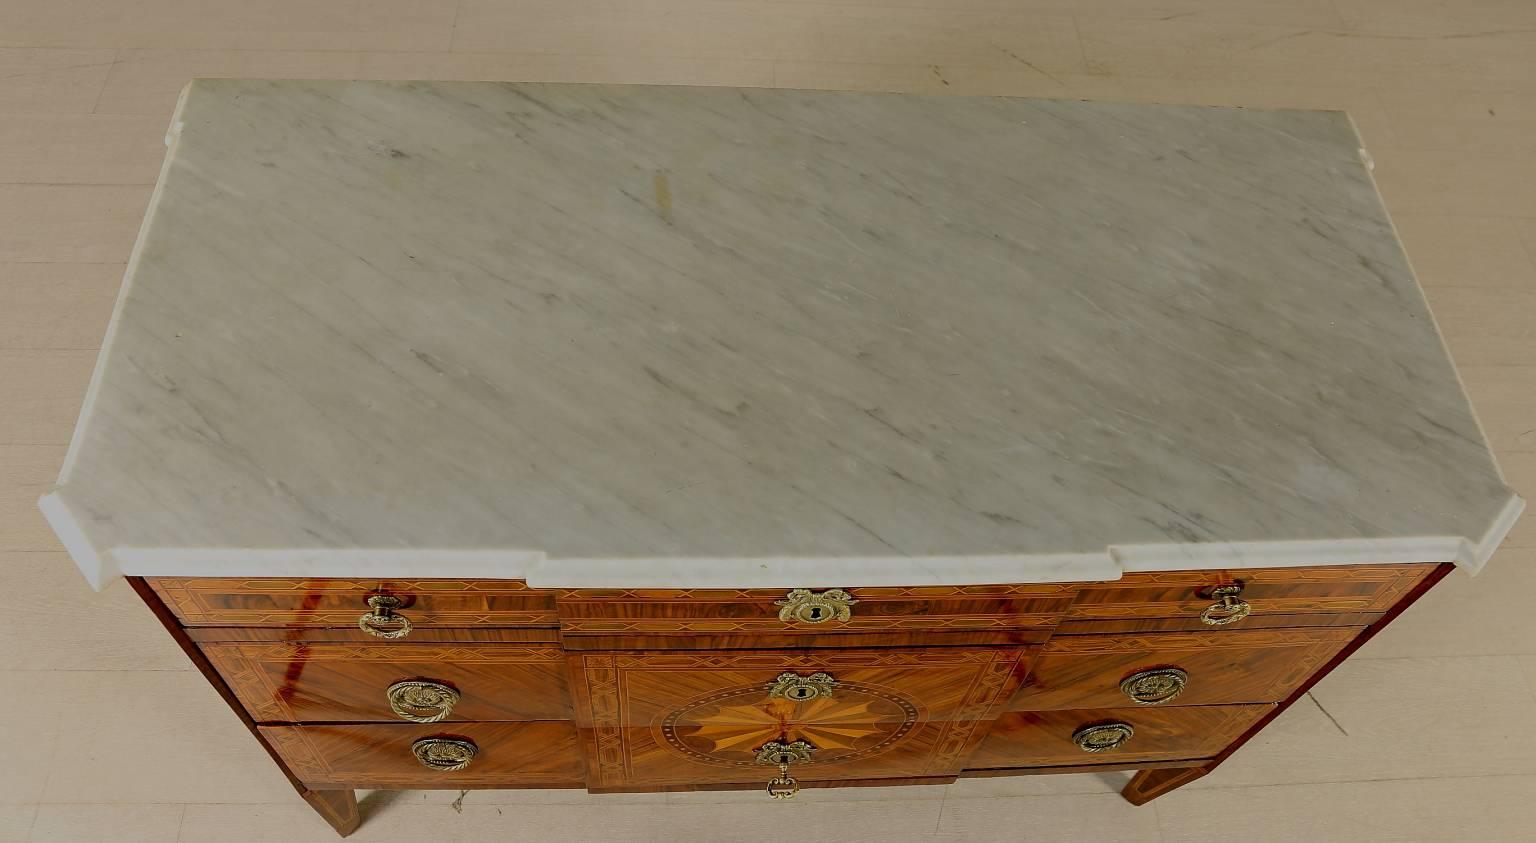 A late 18th century neoclassical Italian walnut and rosewood veneered inlaid chest of drawers with 45° uprights. Pair of drawers with central rose decoration and a smaller drawer underneath the top. Shaped carrara marble top. Walnut panels, various